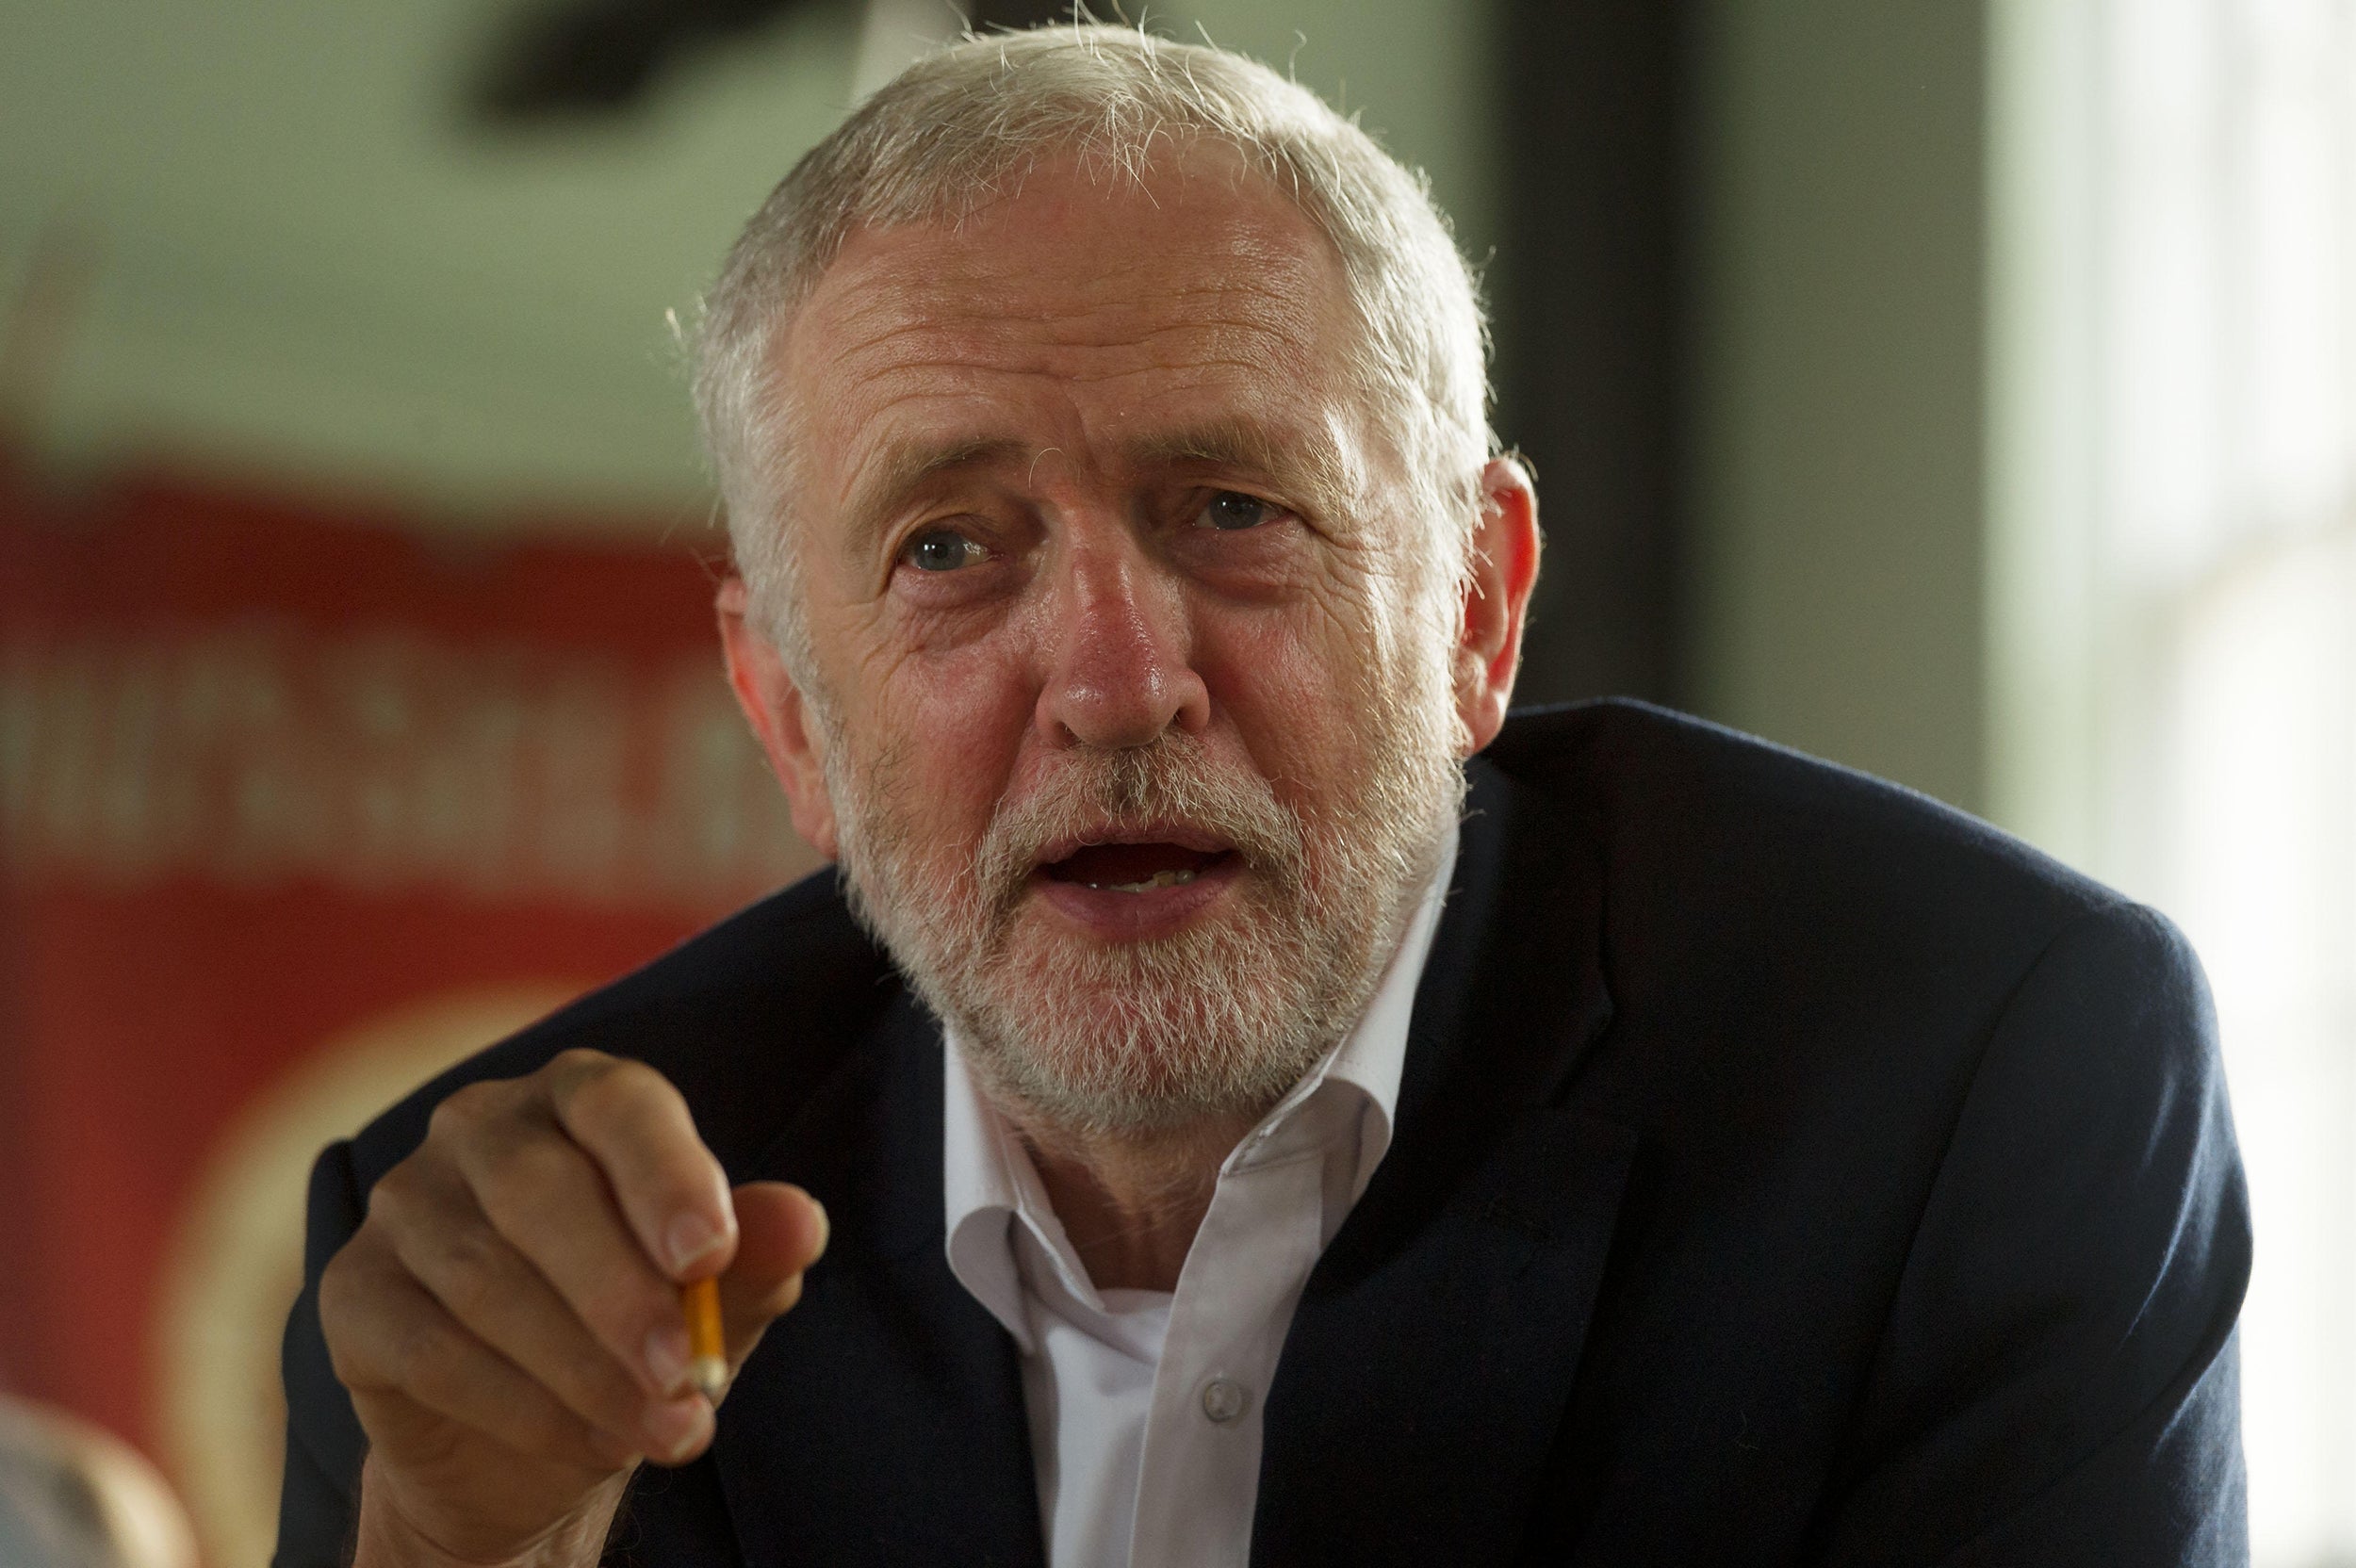 Labour leader Jeremy Corbyn said it had taken 15 months too long to get to this point